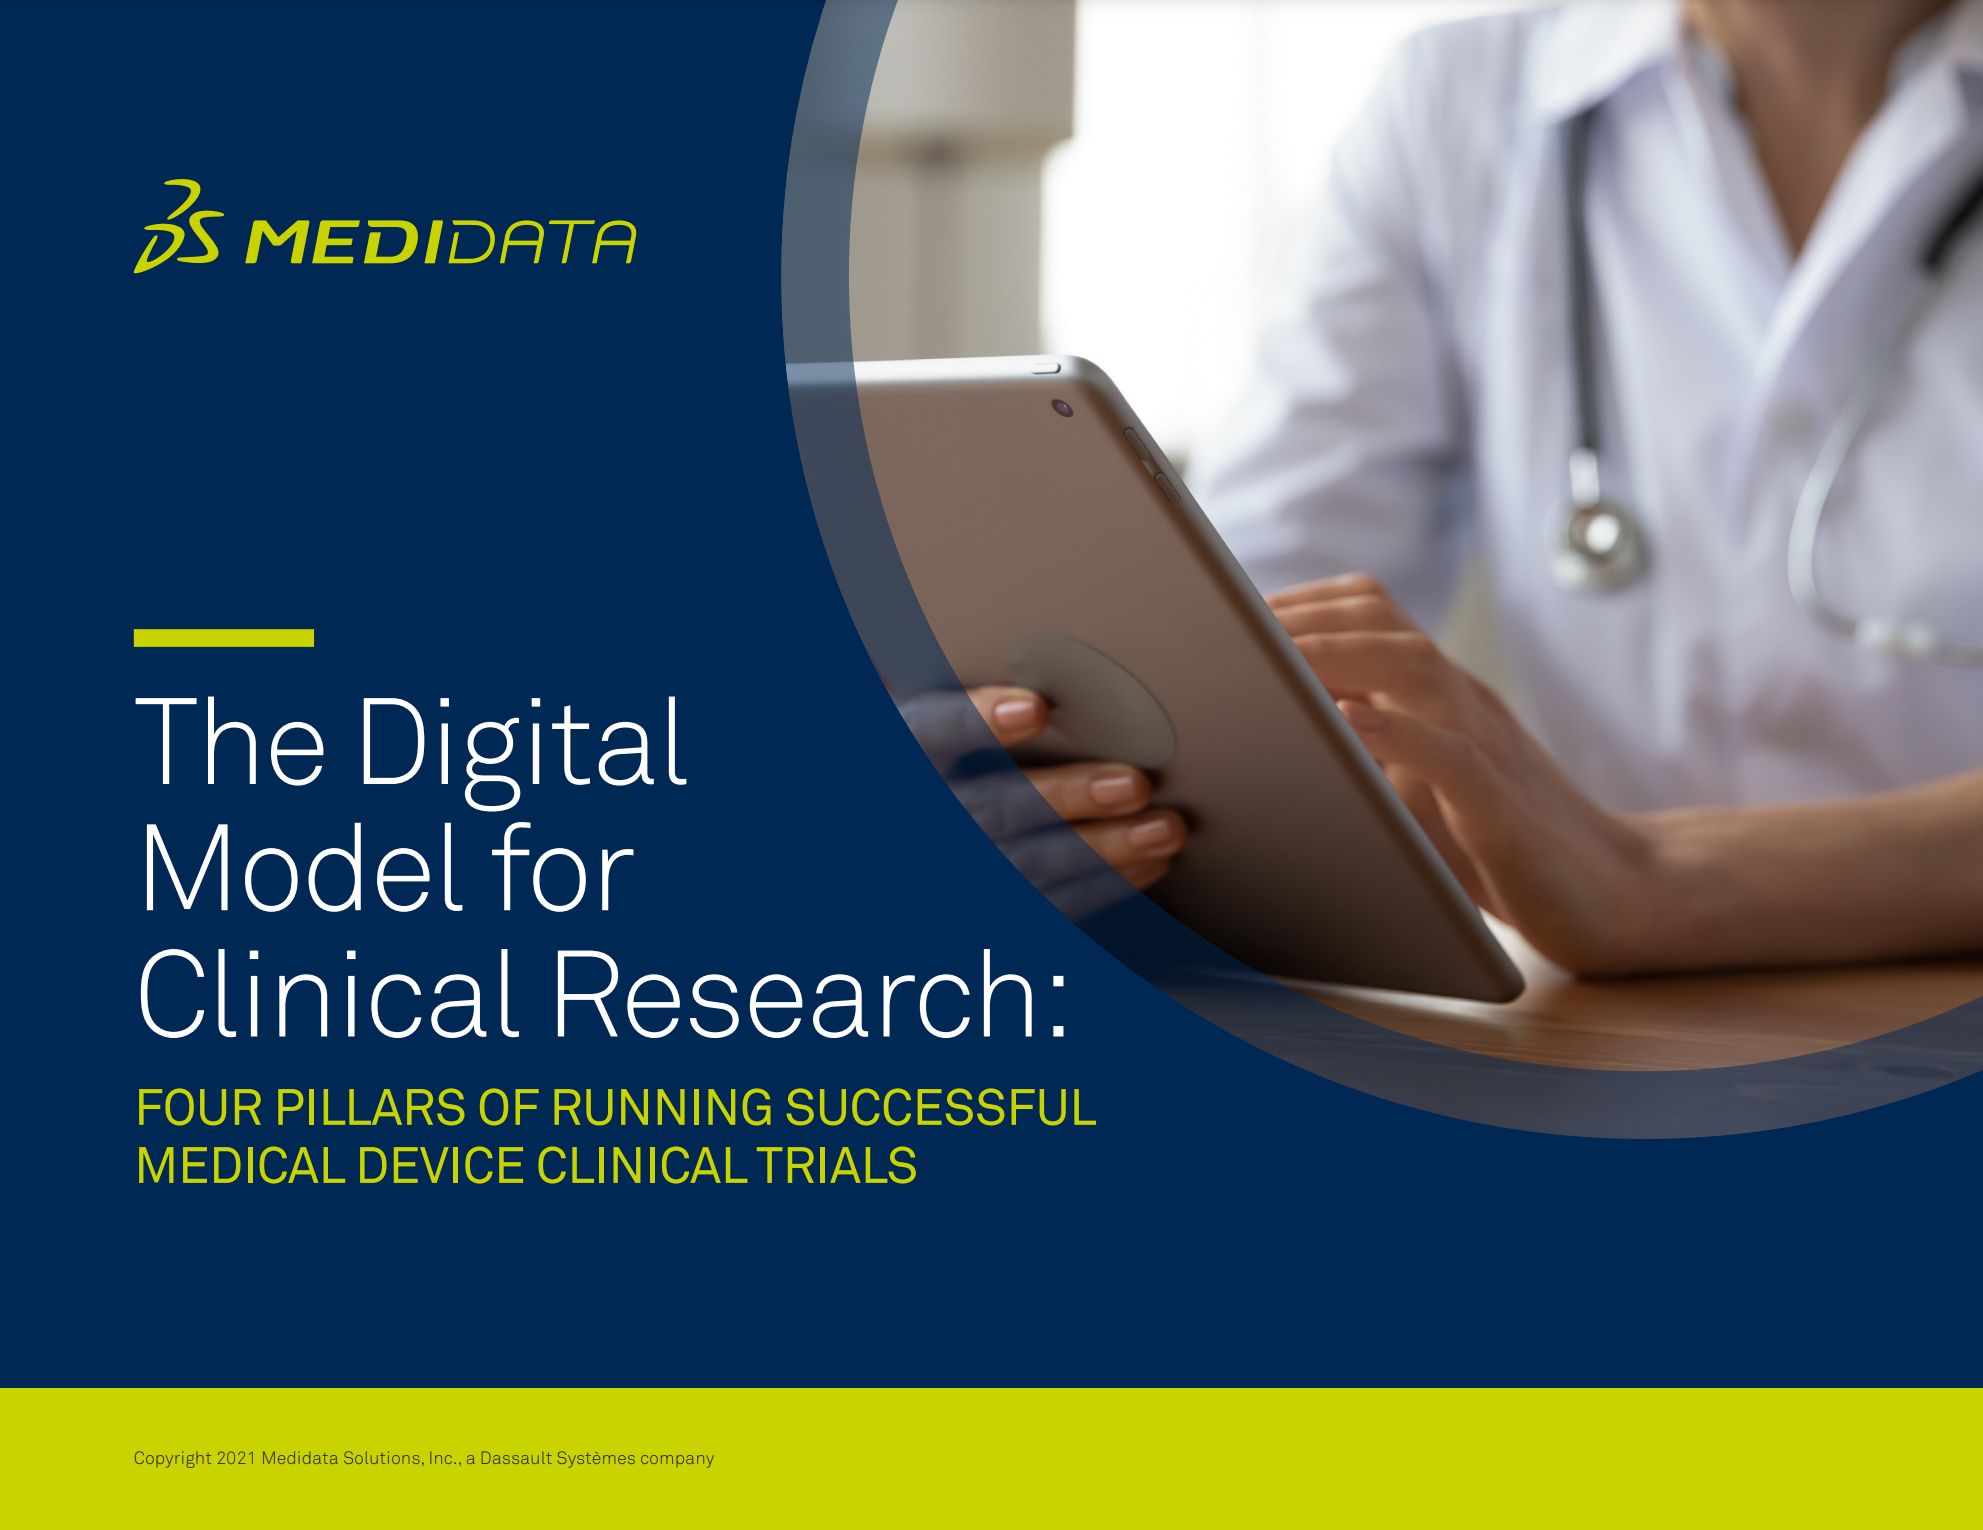 The Digital Model for Clinical Research: 4 Pillars of Running Successful Medical Device Clinical Trials 	